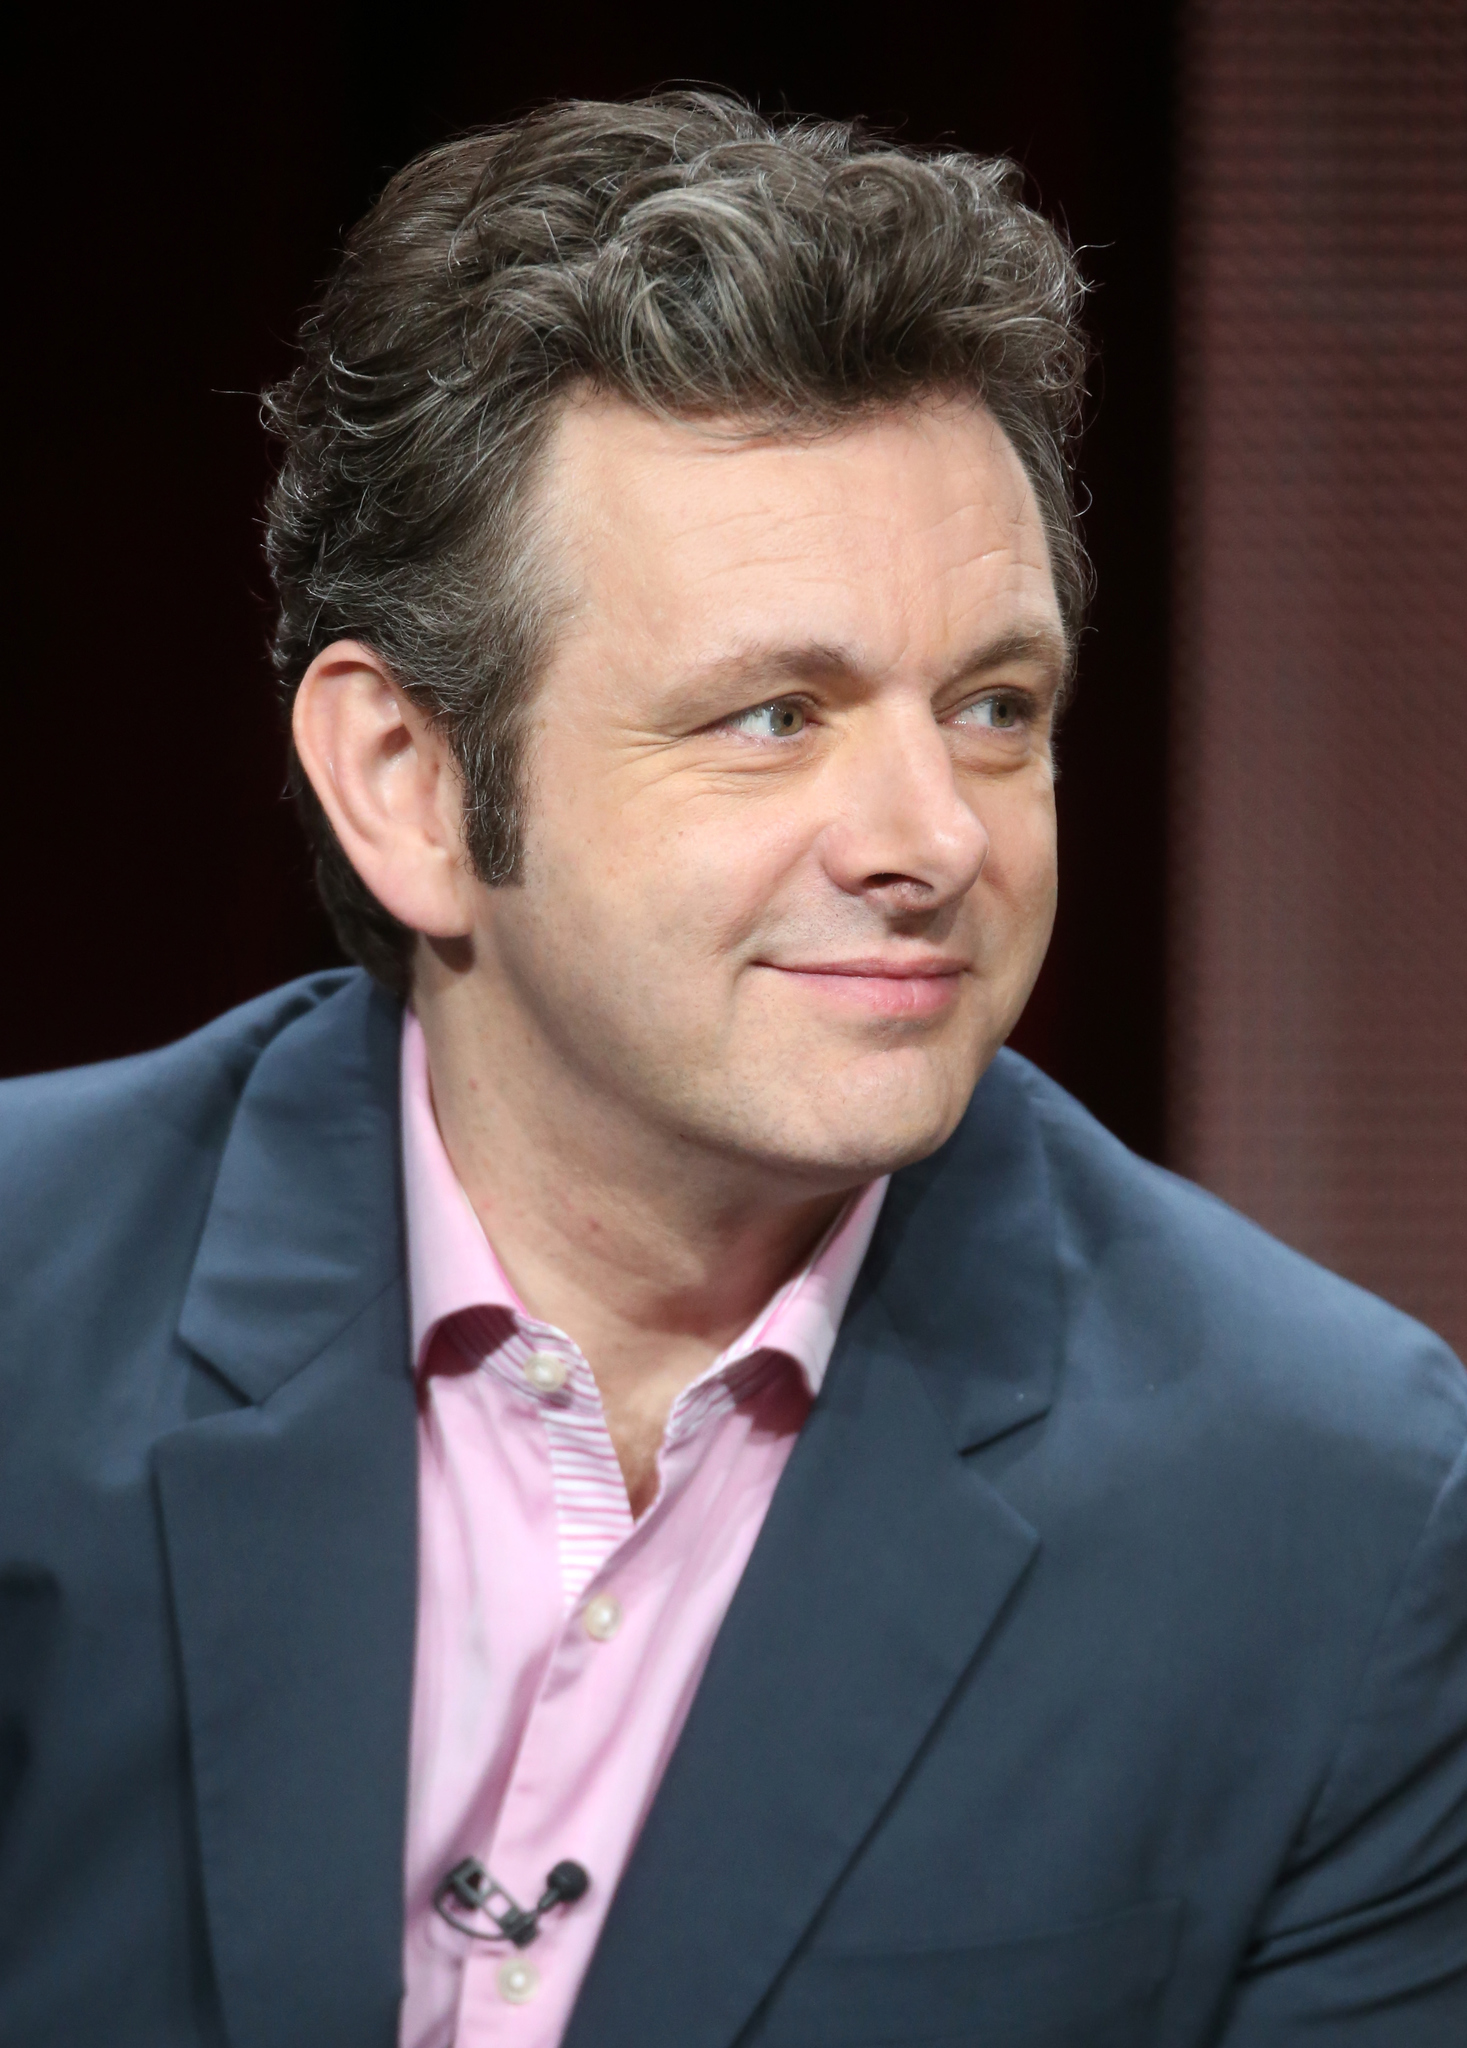 Michael Sheen at event of Masters of Sex (2013)